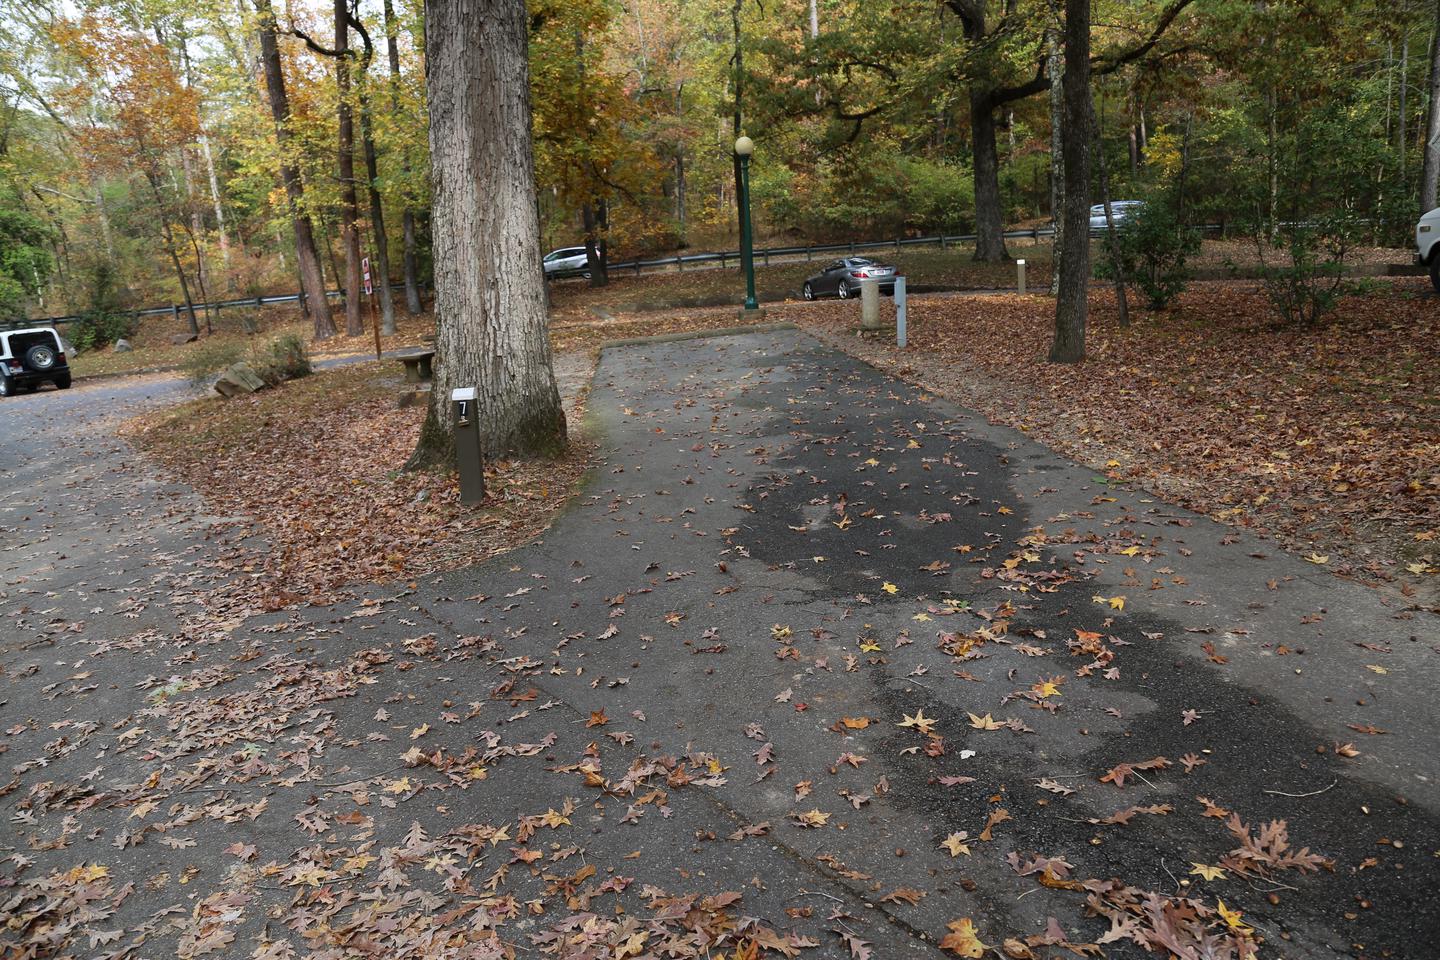 Paved RV site surrounded by fallen leaves and treesCampsite 7